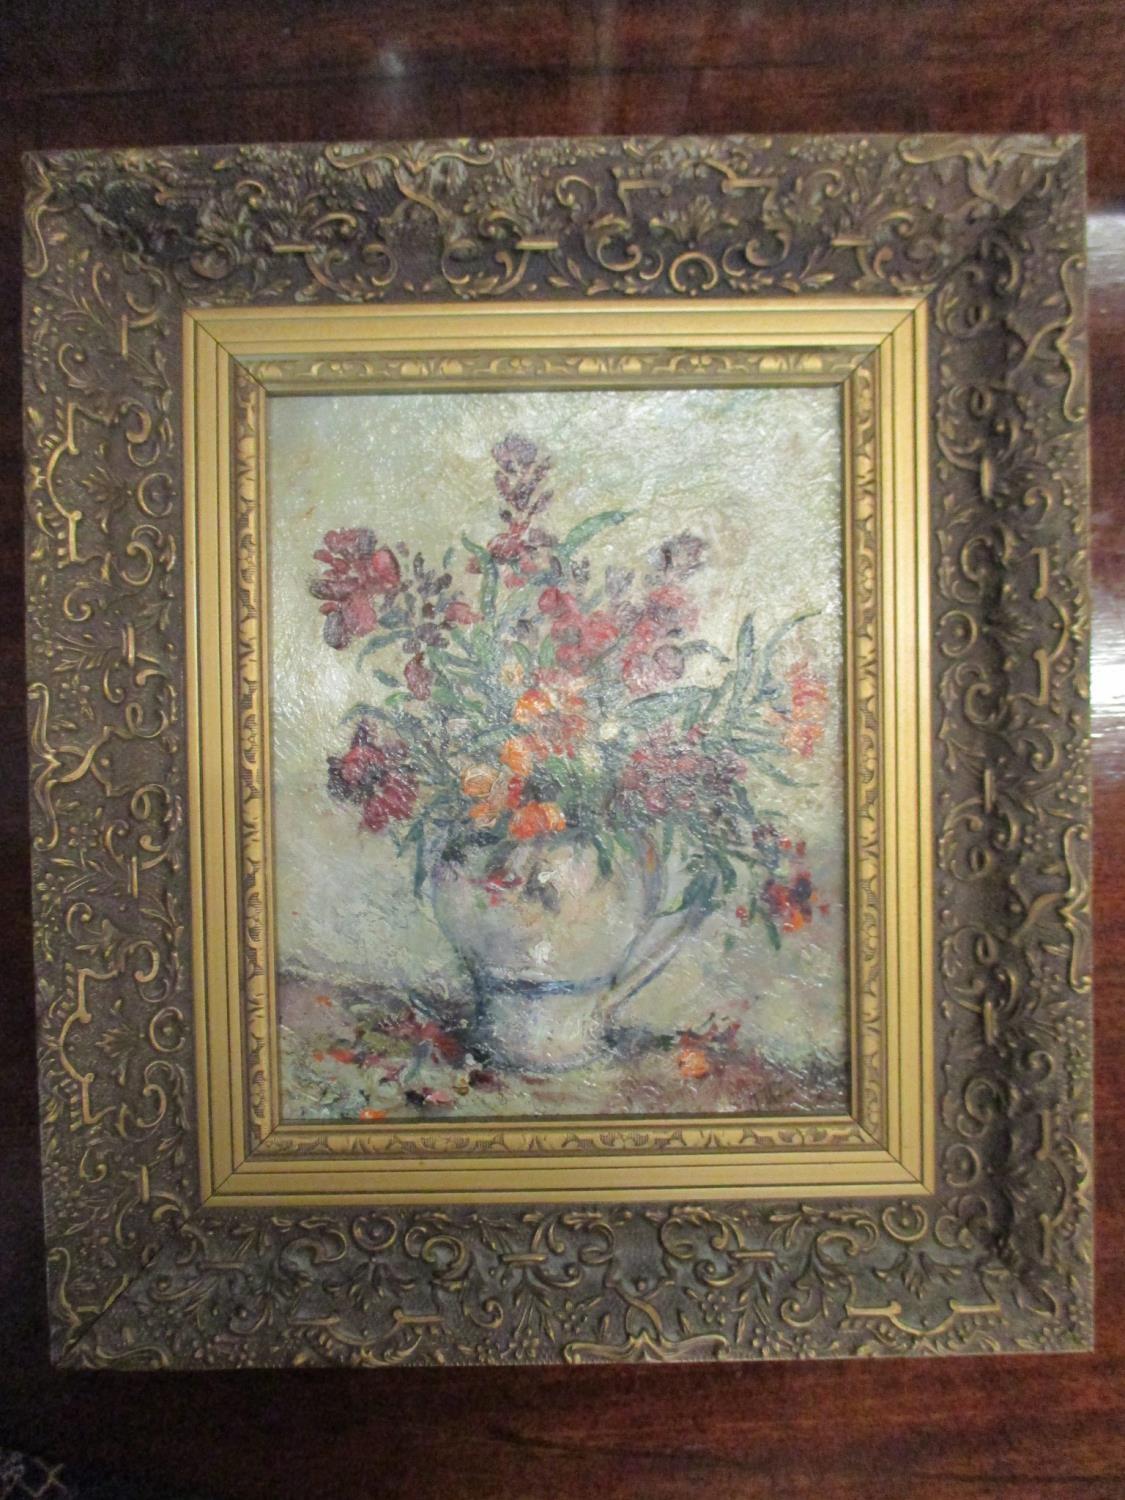 Arthur Edward Davis (1893-1988) Wallflowers, oil painting on artists board, signed lower right - Image 2 of 6